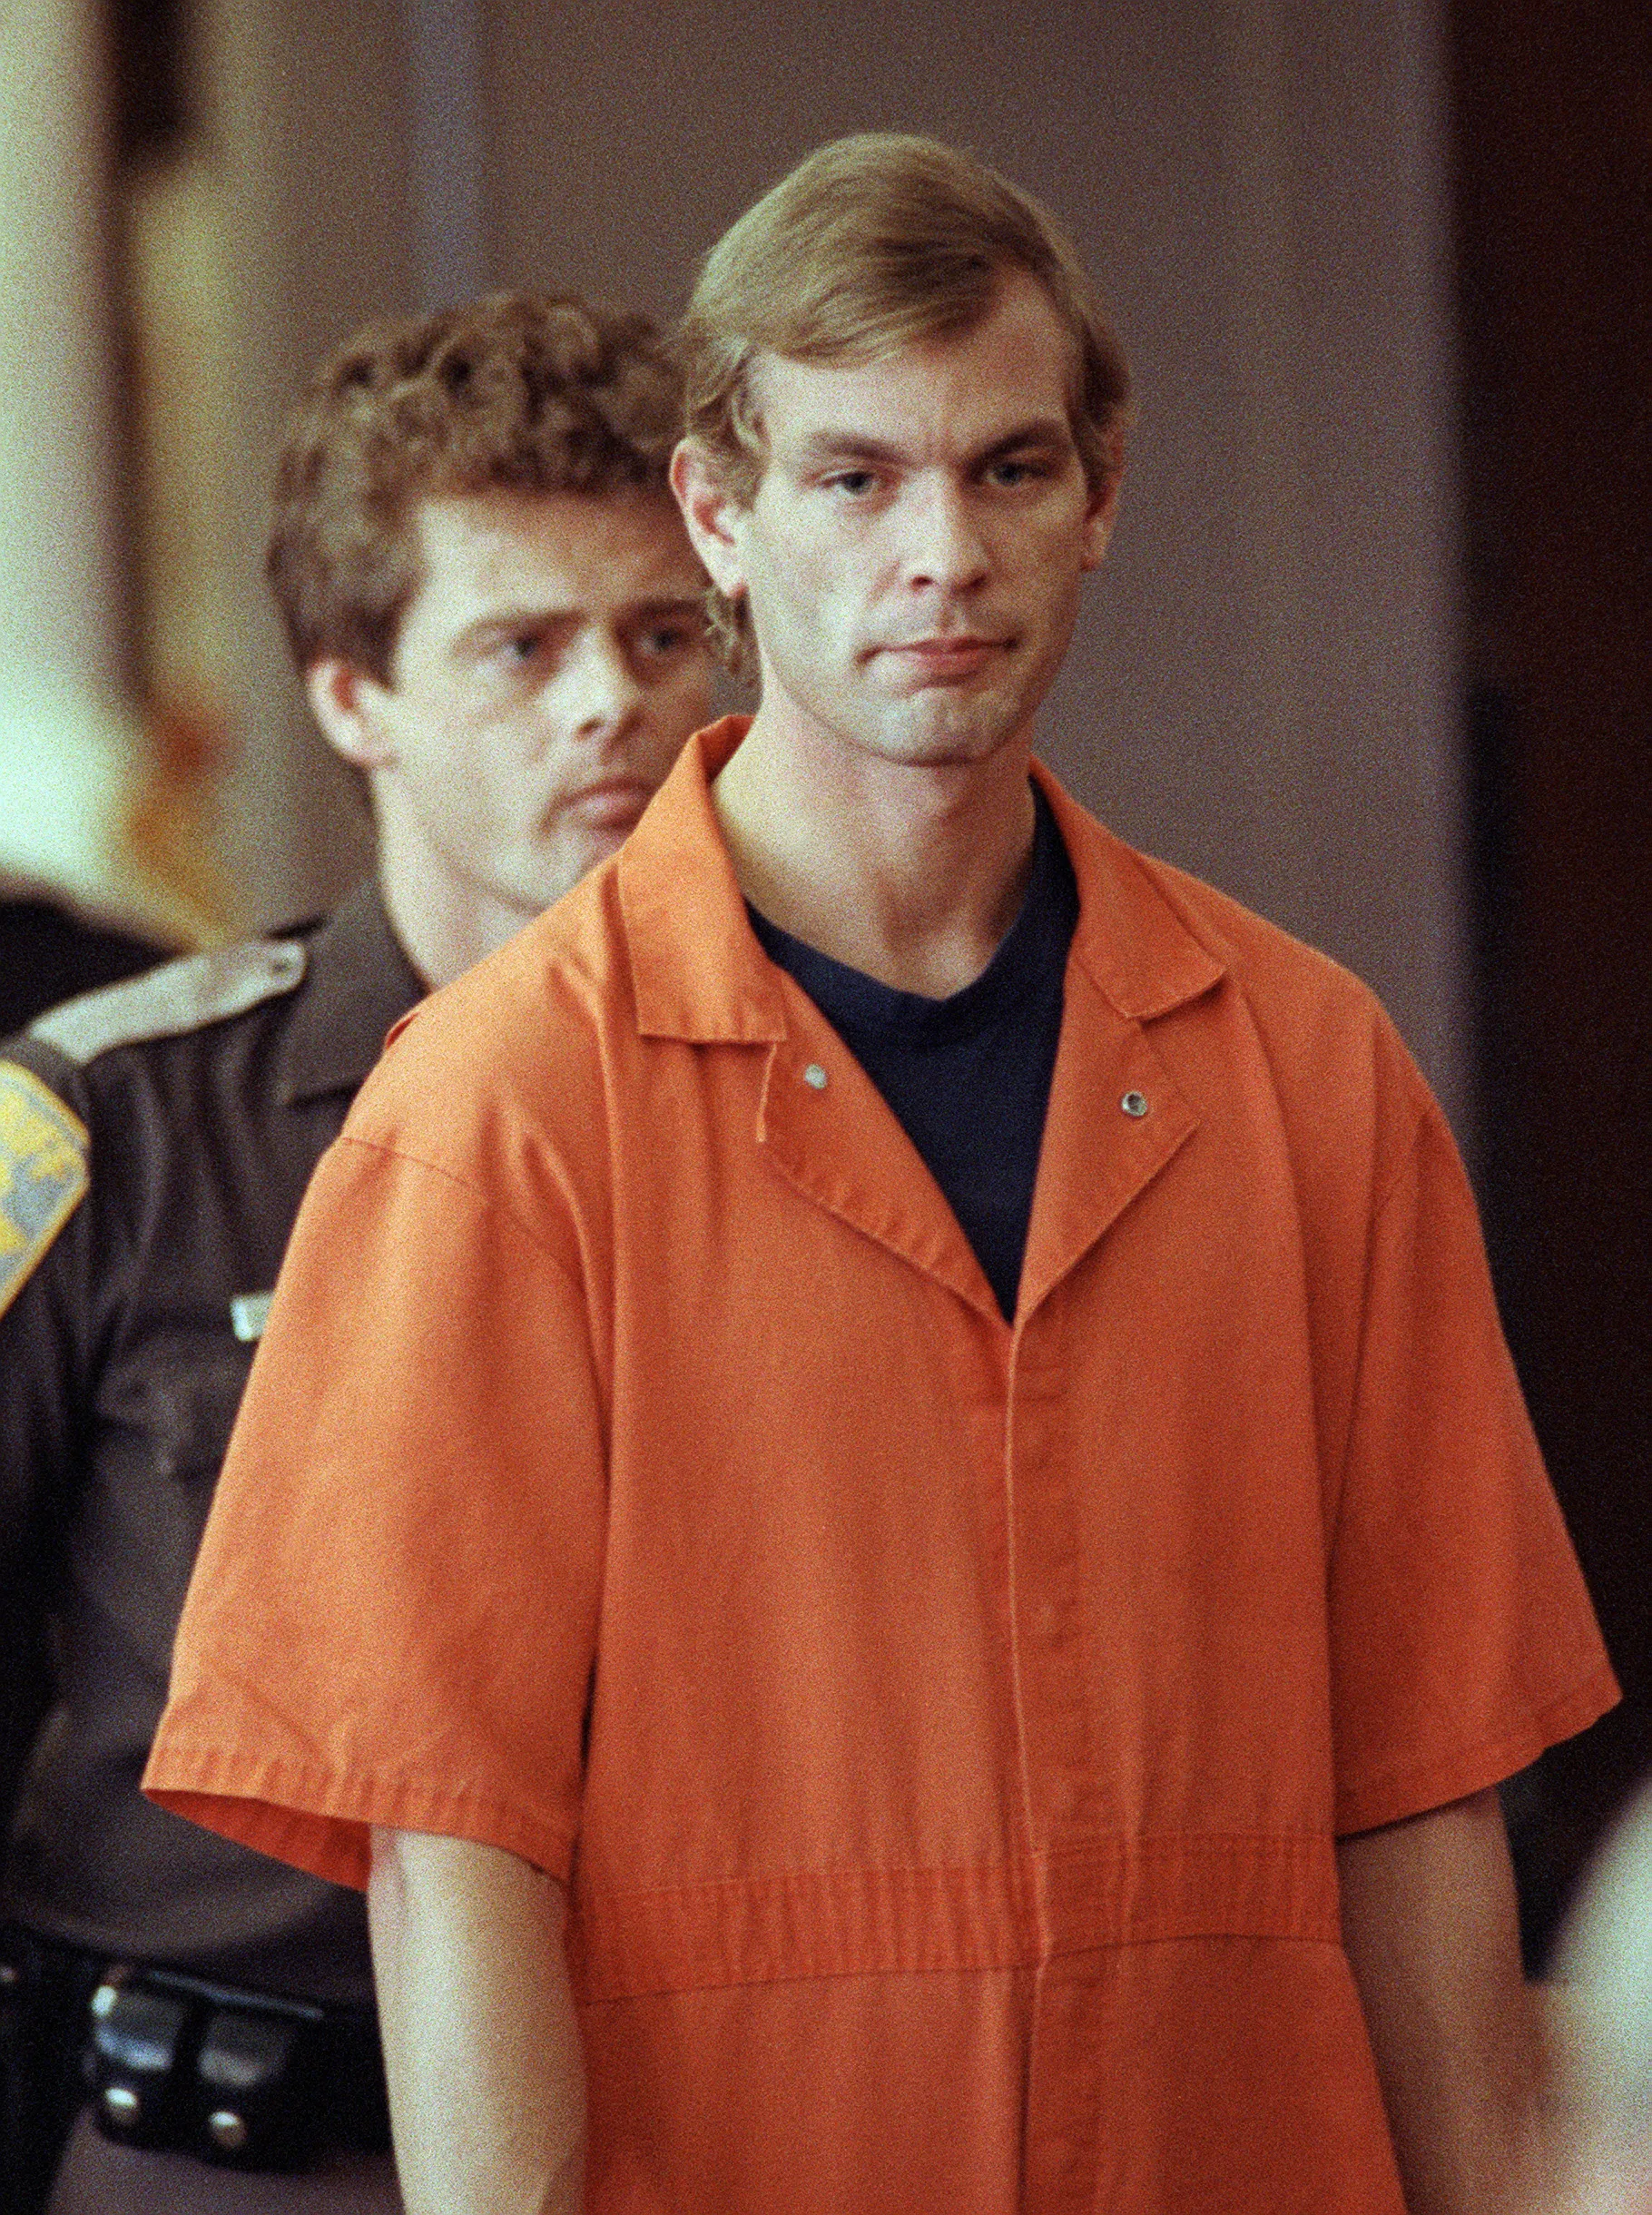 Why did Dahmer do what he did?